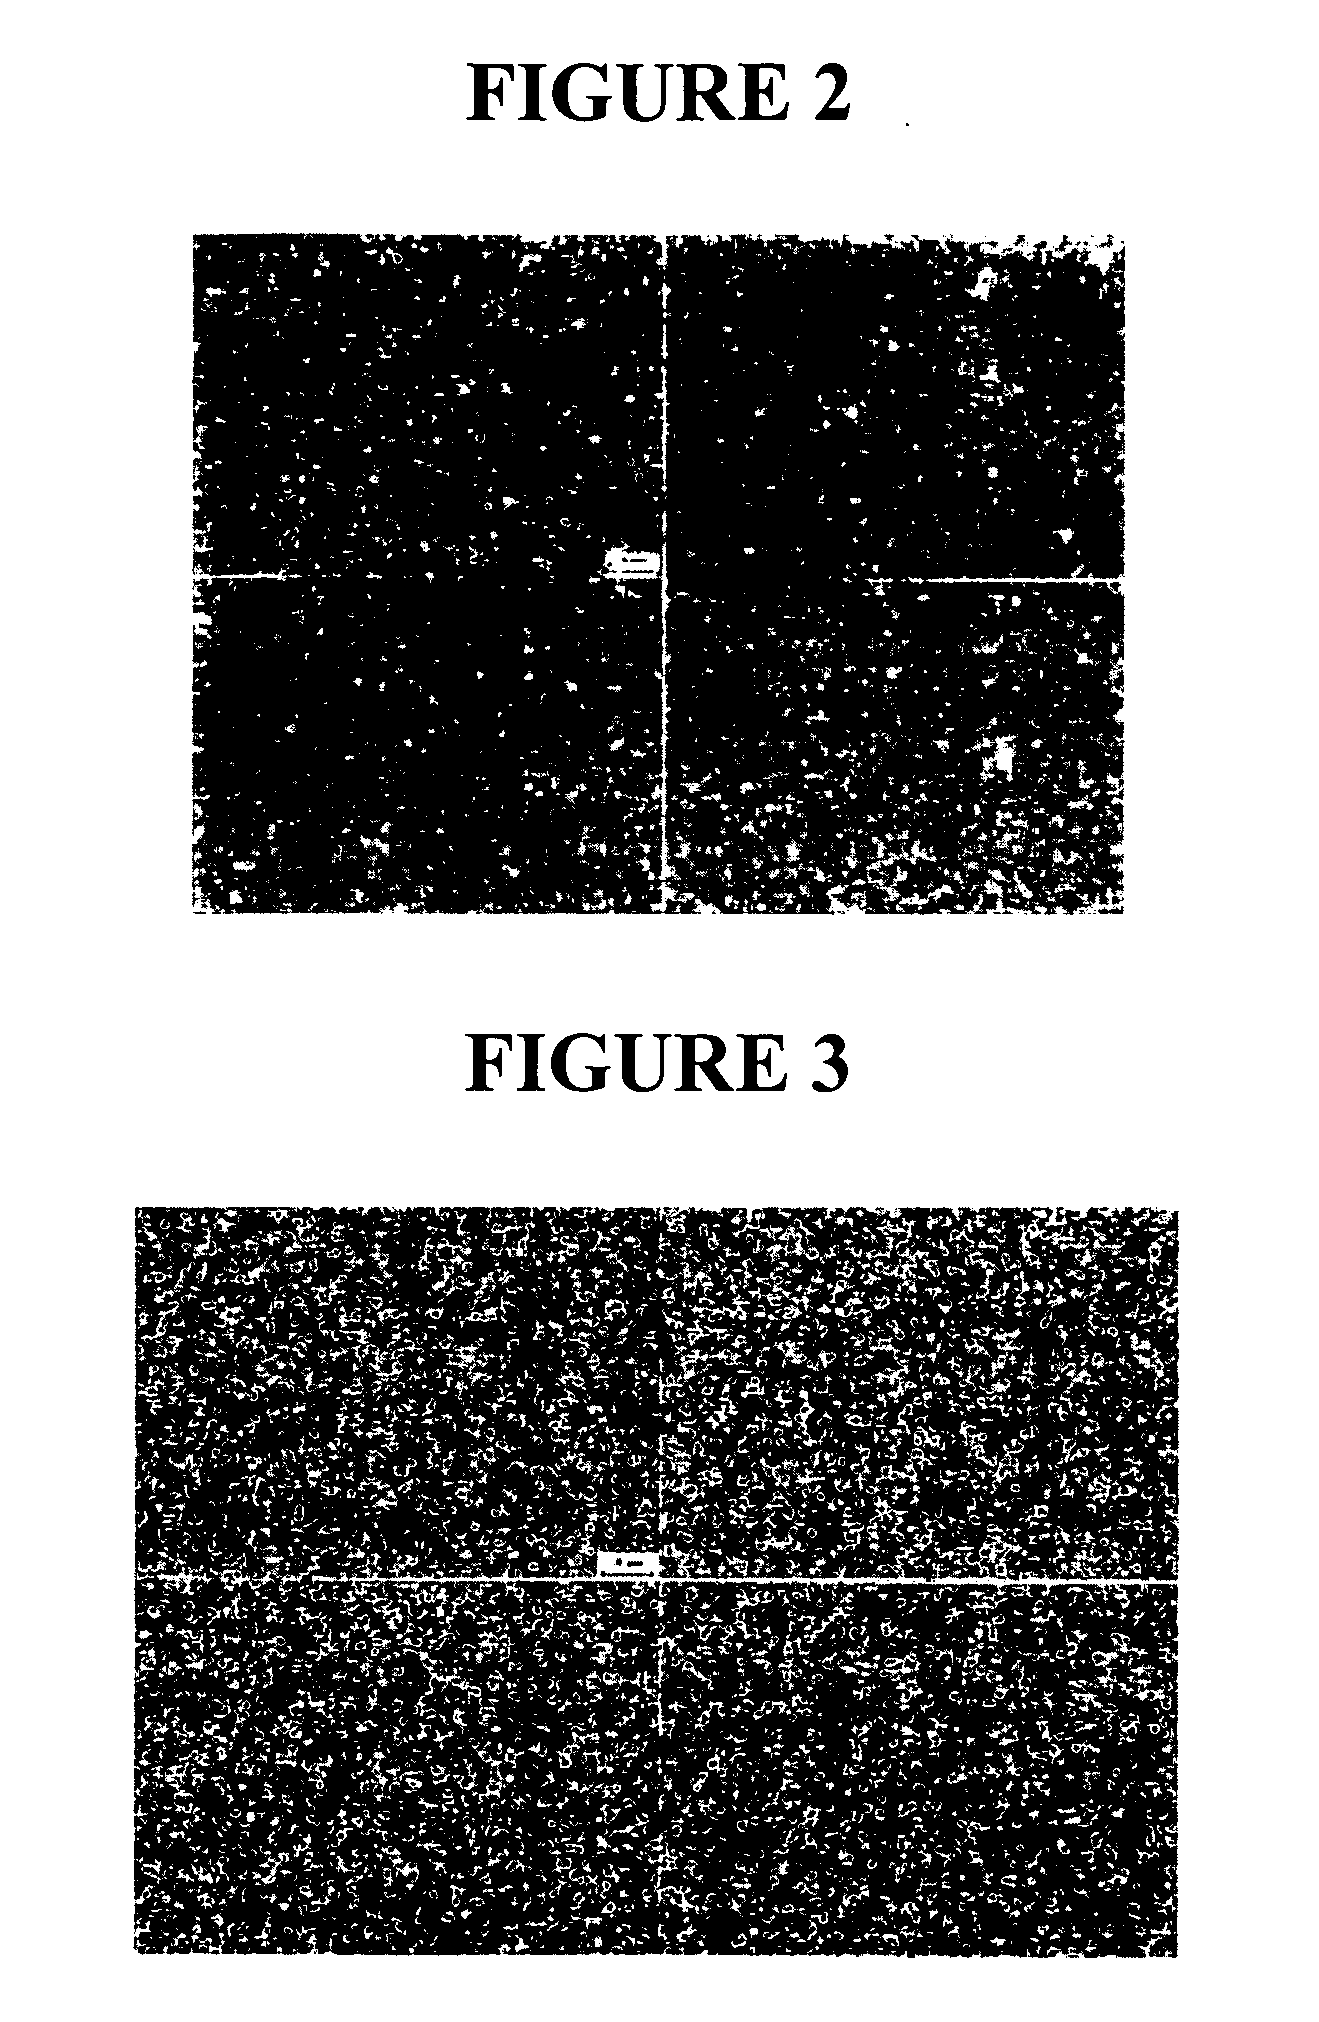 Injectable compositions of nanoparticulate immunosuppressive compounds